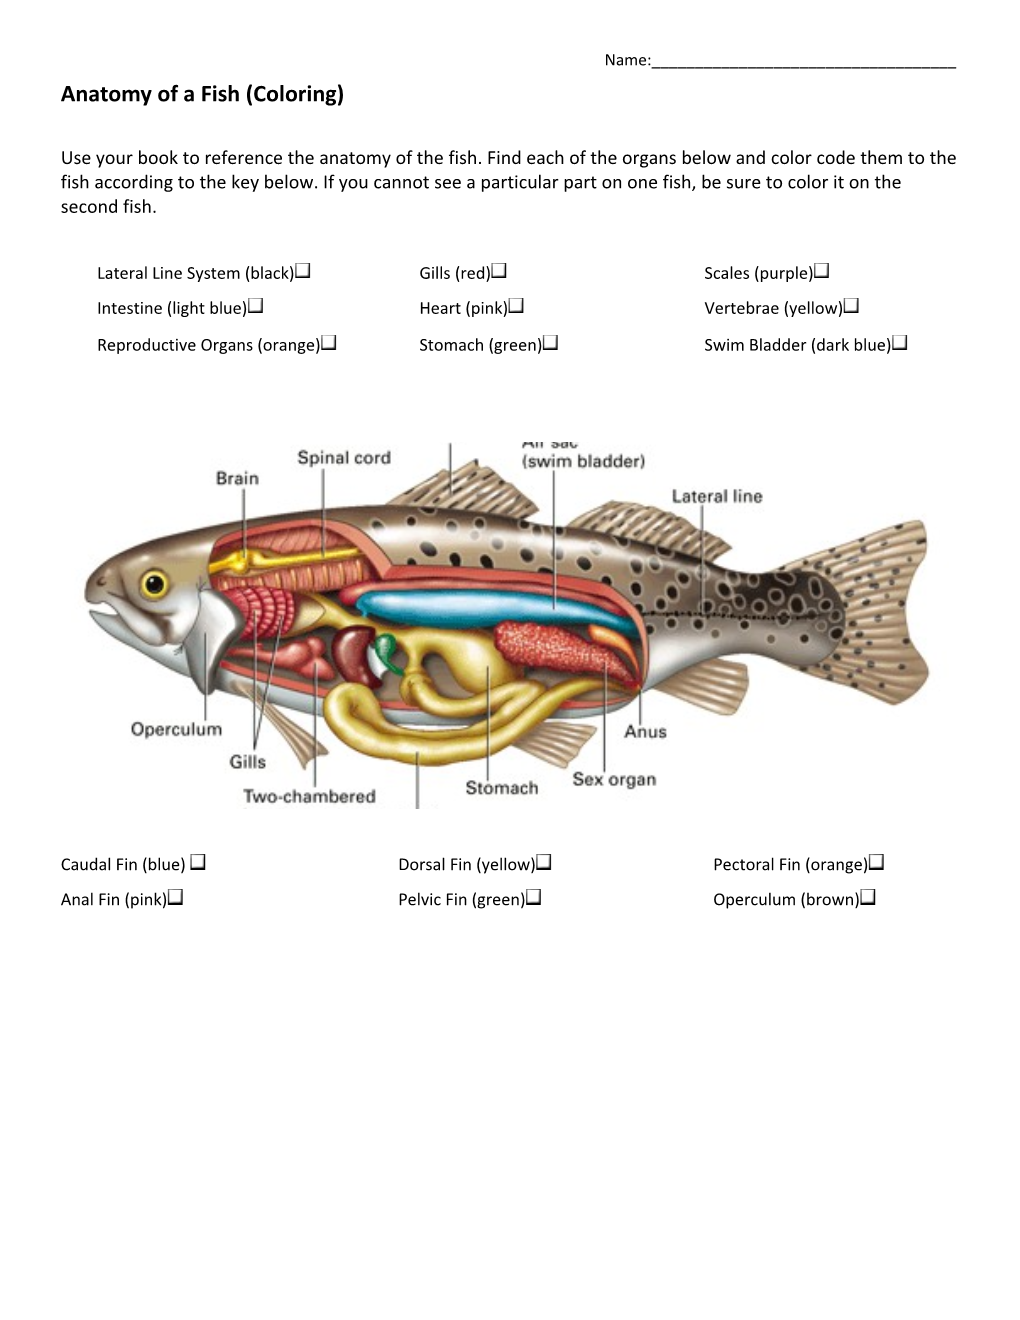 Anatomy of a Fish (Coloring)